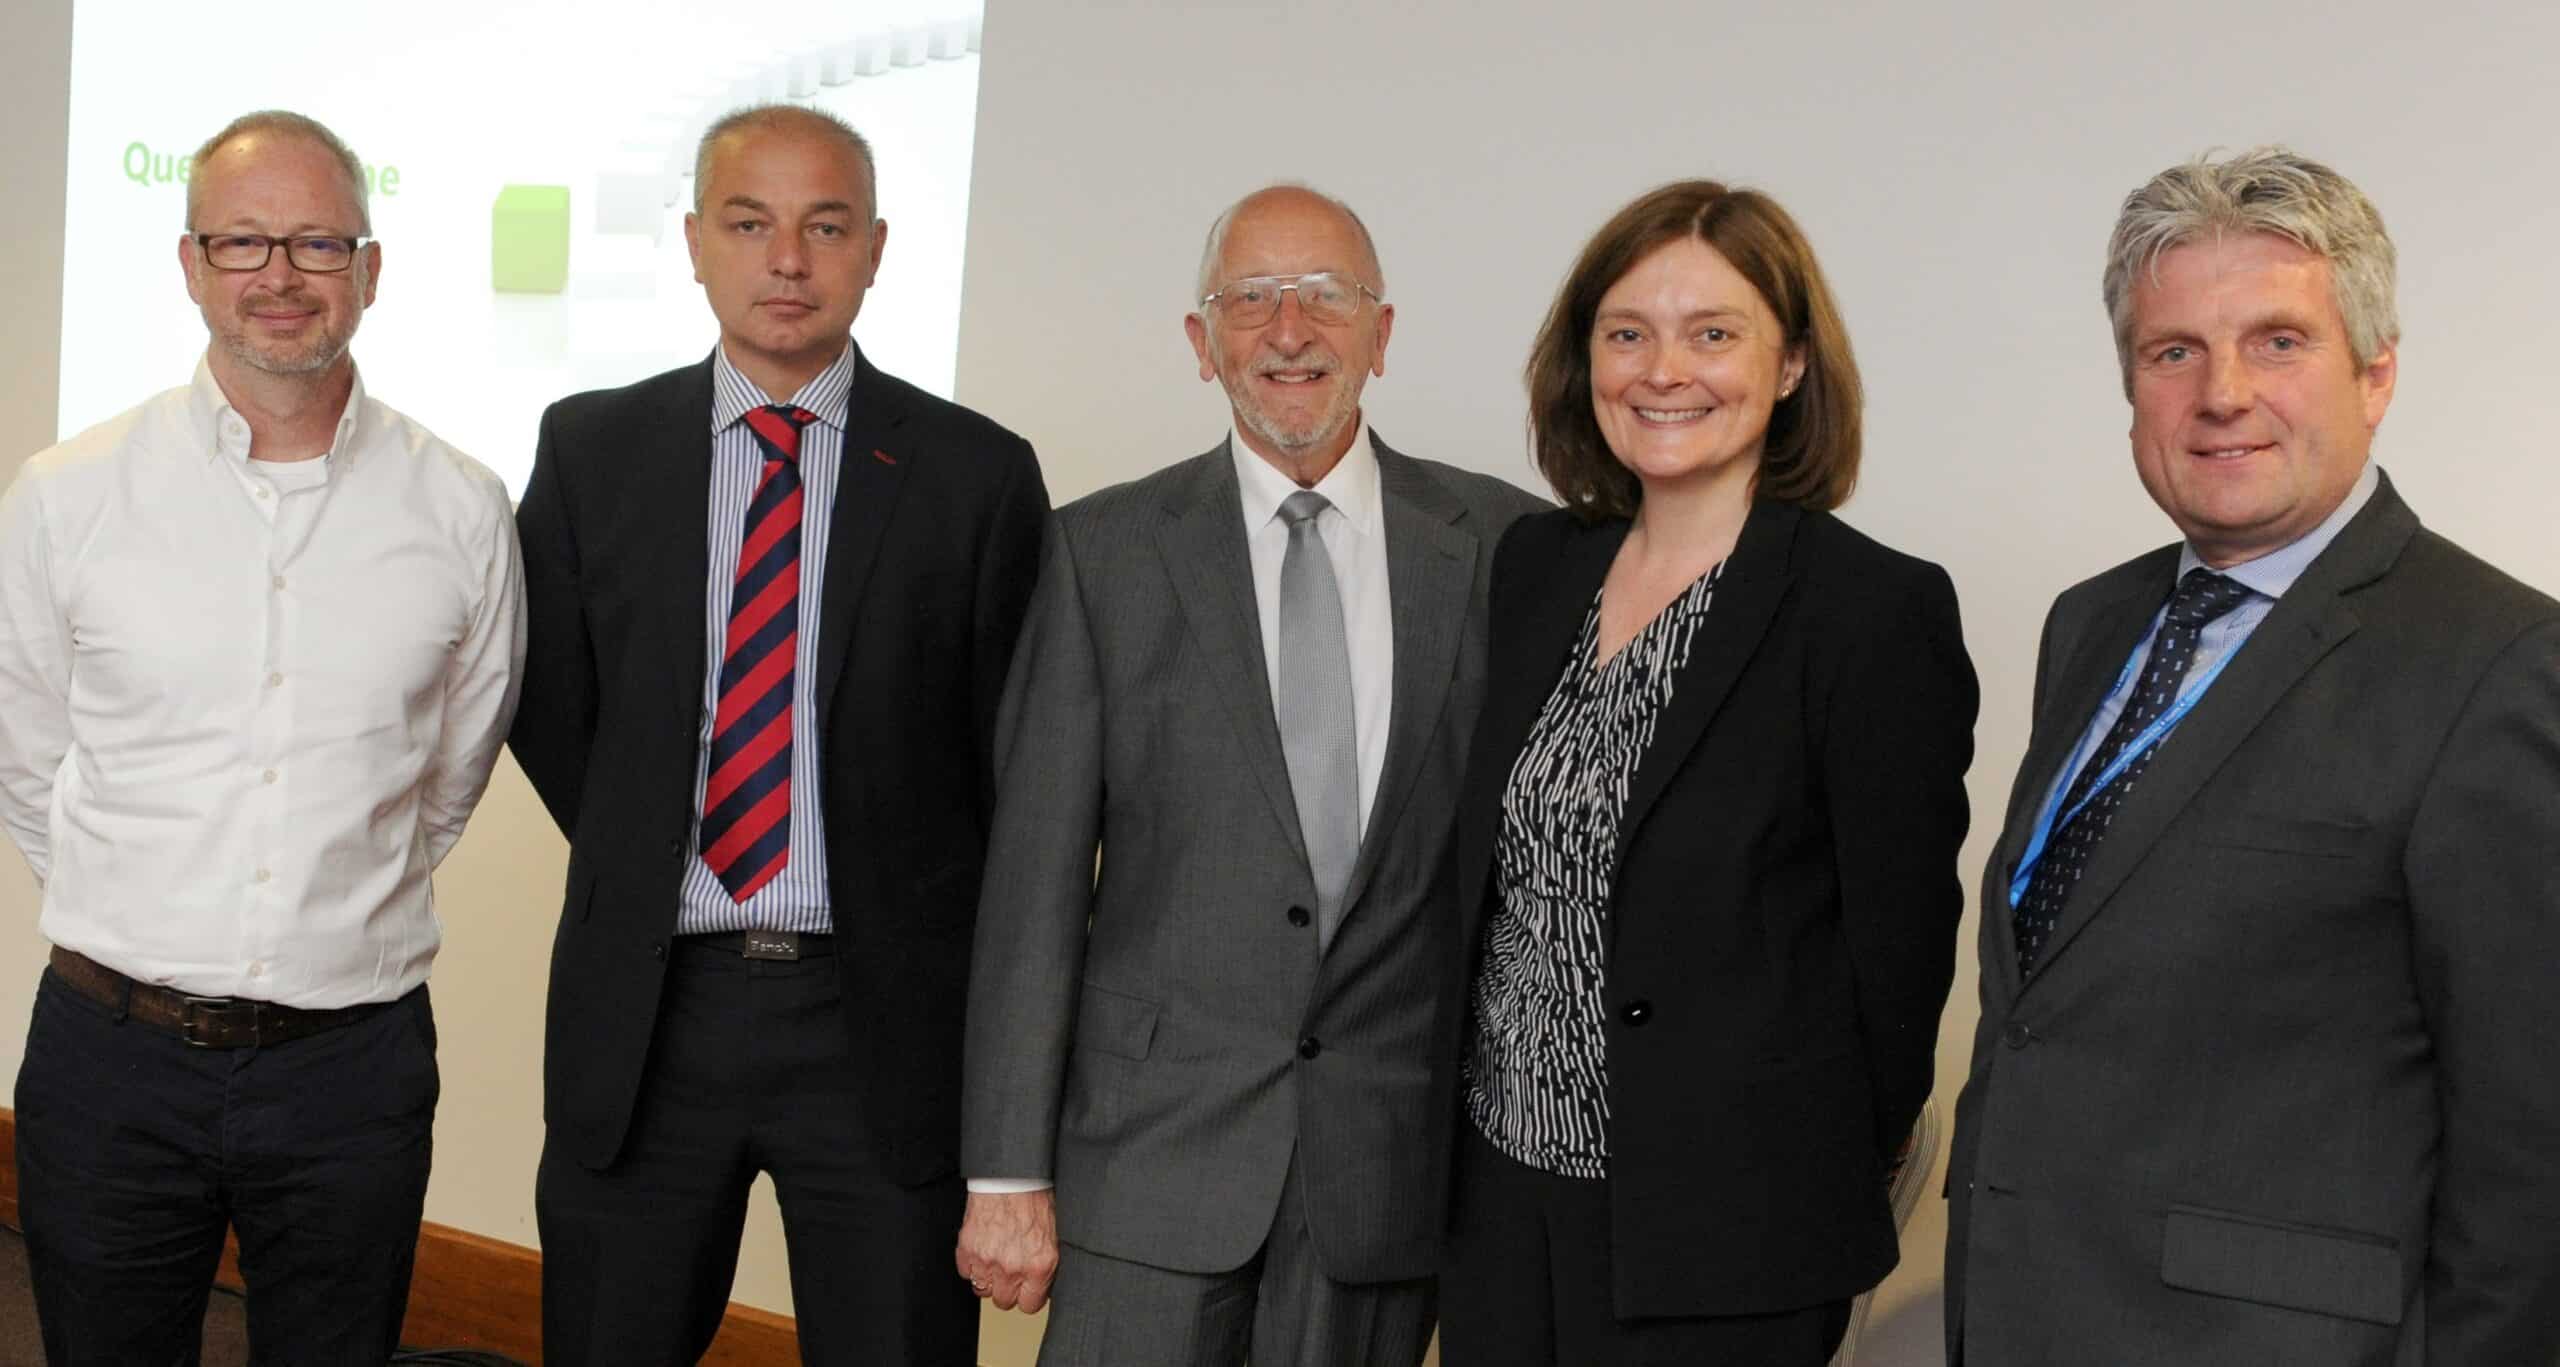 ICFM director Peter Eldridge NEW centre with Masterclass speakers Tony Harbron Andy Phillips Kathy Halliday and Peter Wood